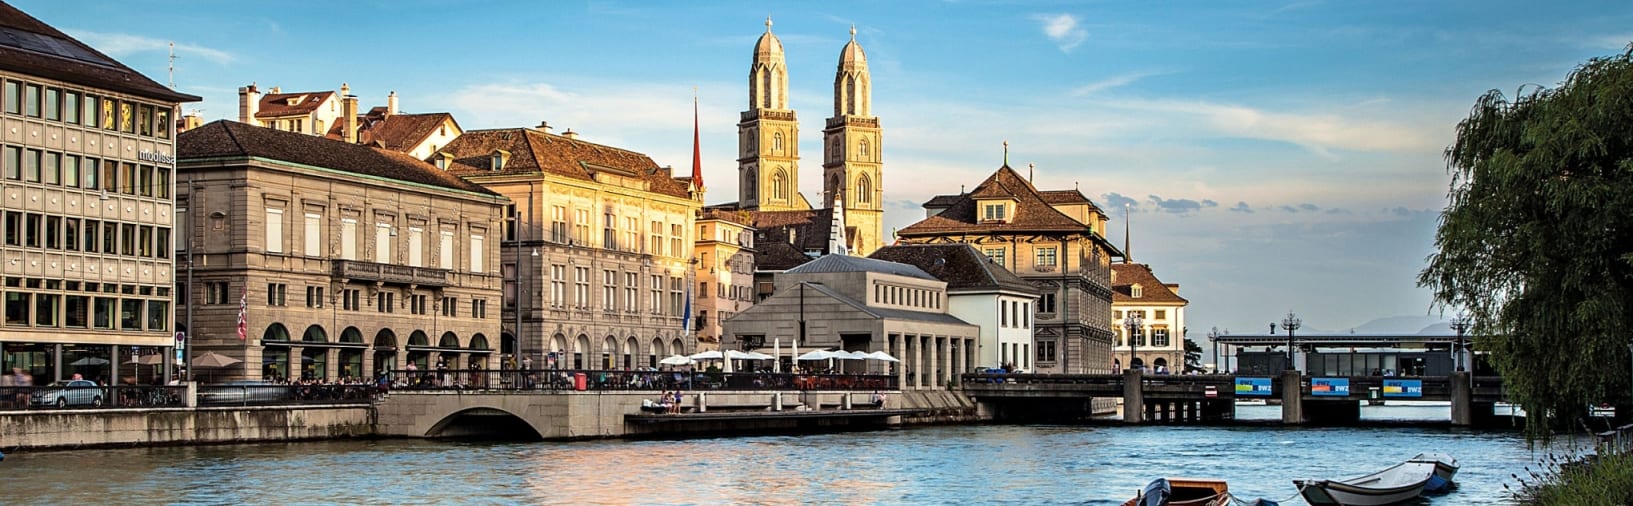 Zürich is a boutique city ranked as one of the world’s top cities for quality of life. Alpine trails are within an hour.